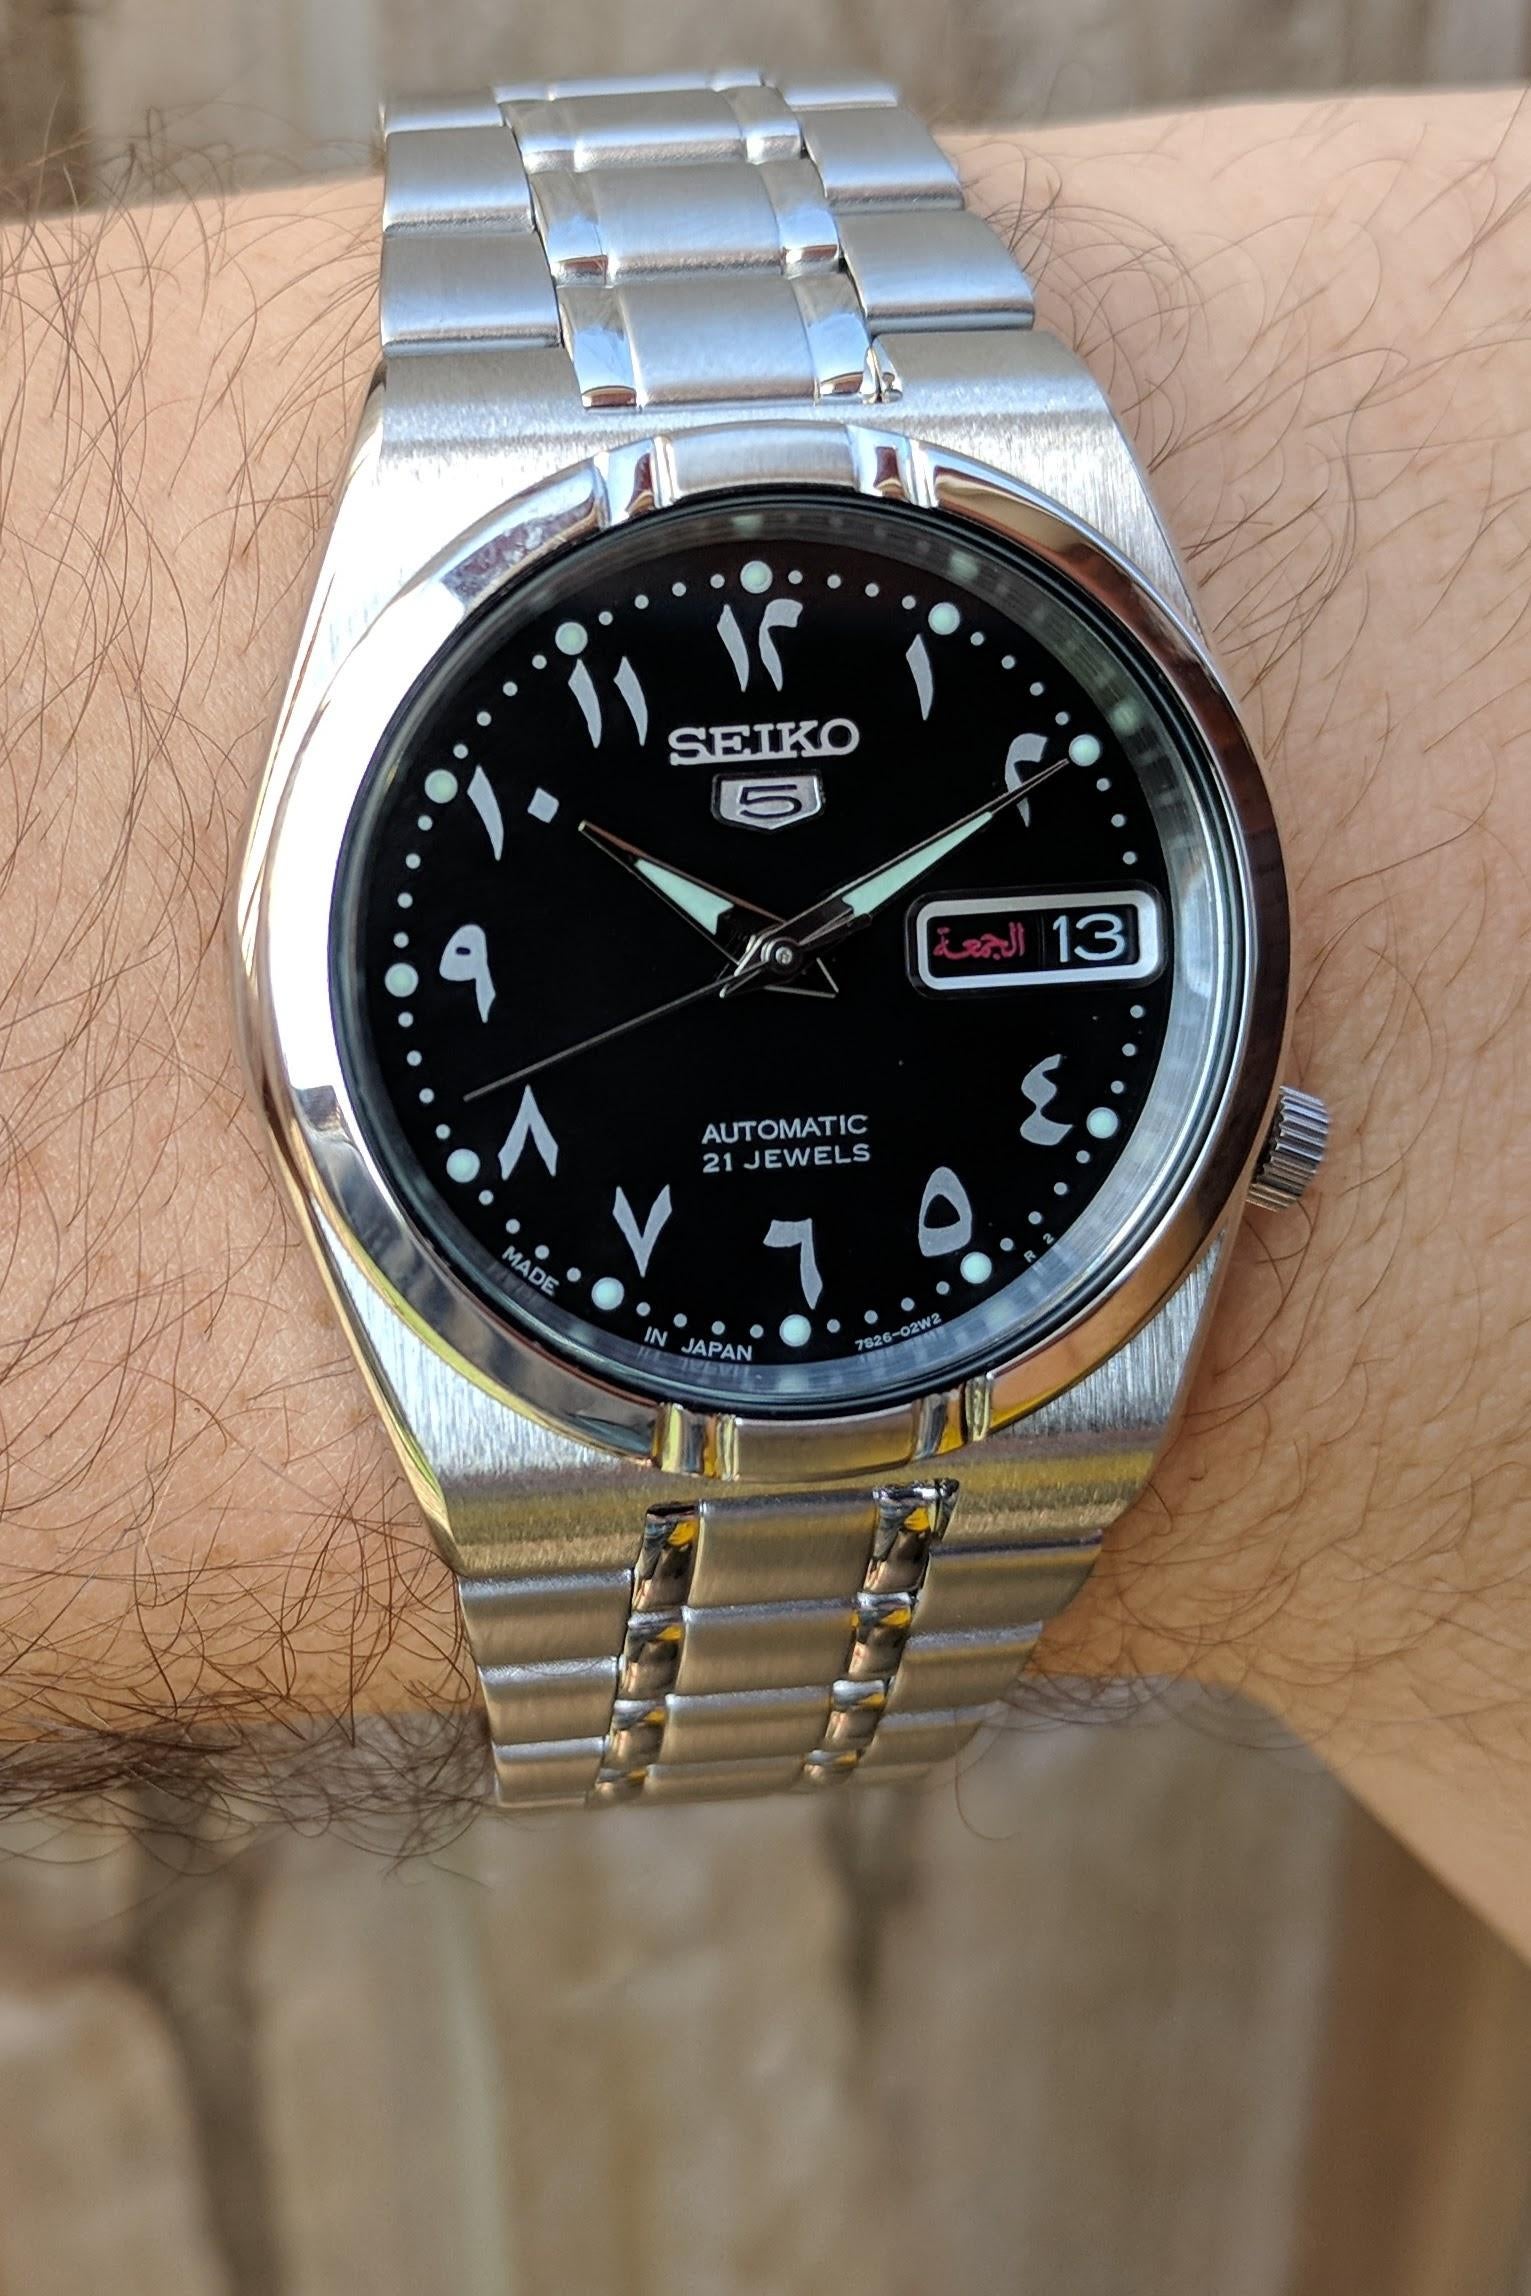 Vintage Seiko with Arabic numbers on dial - does it exist? | WatchUSeek  Watch Forums